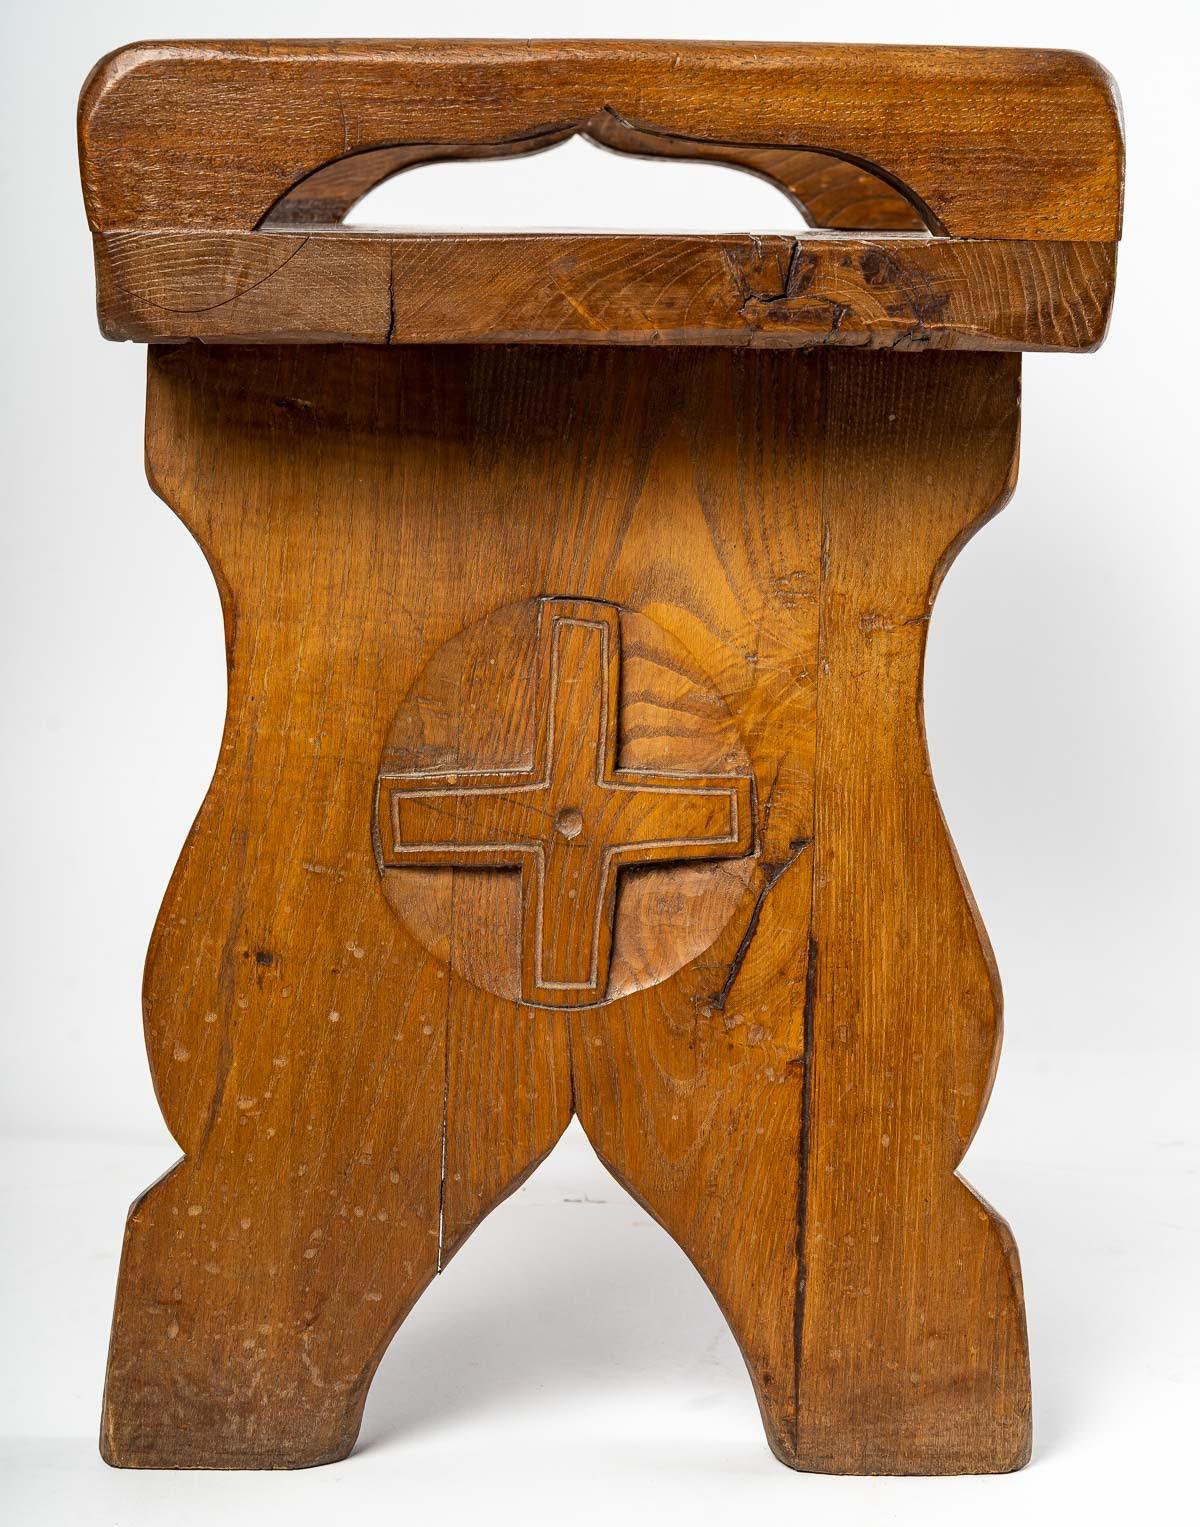 Carved Wood Stool, Oak, 1950-1960.

Carved wood stool from the middle of the 20th century, 1950-1960, mountain work.

Dimensions: H: 49cm, W: 50cm, D: 32cm.